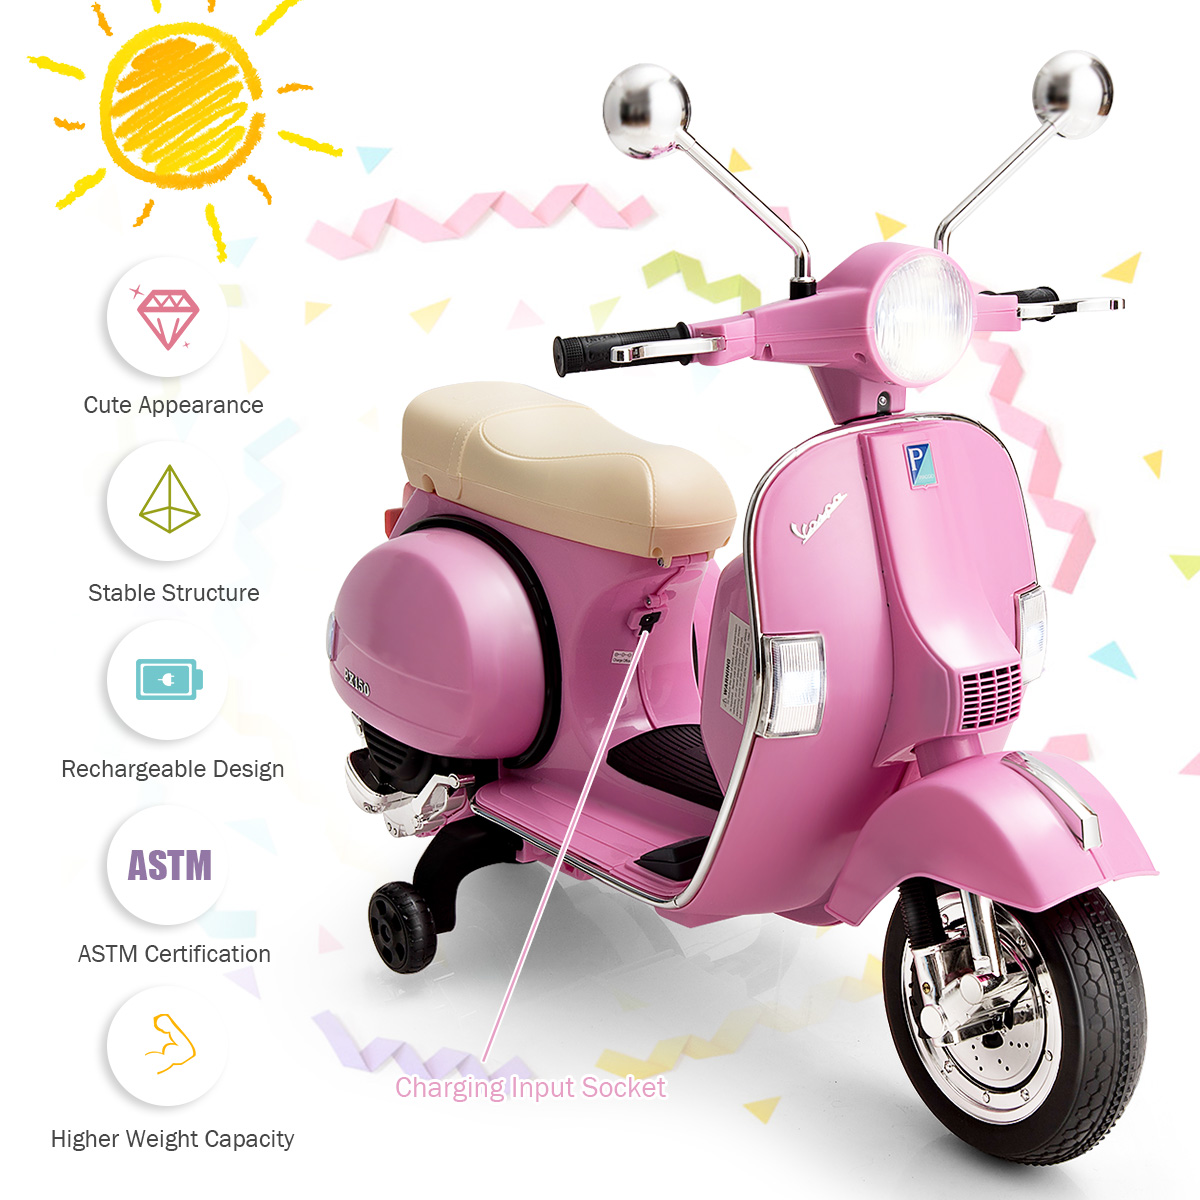 Costway Kids Vespa Scooter, 6V Rechargeable Ride on Motorcycle w/Training Wheels Pink - image 6 of 9